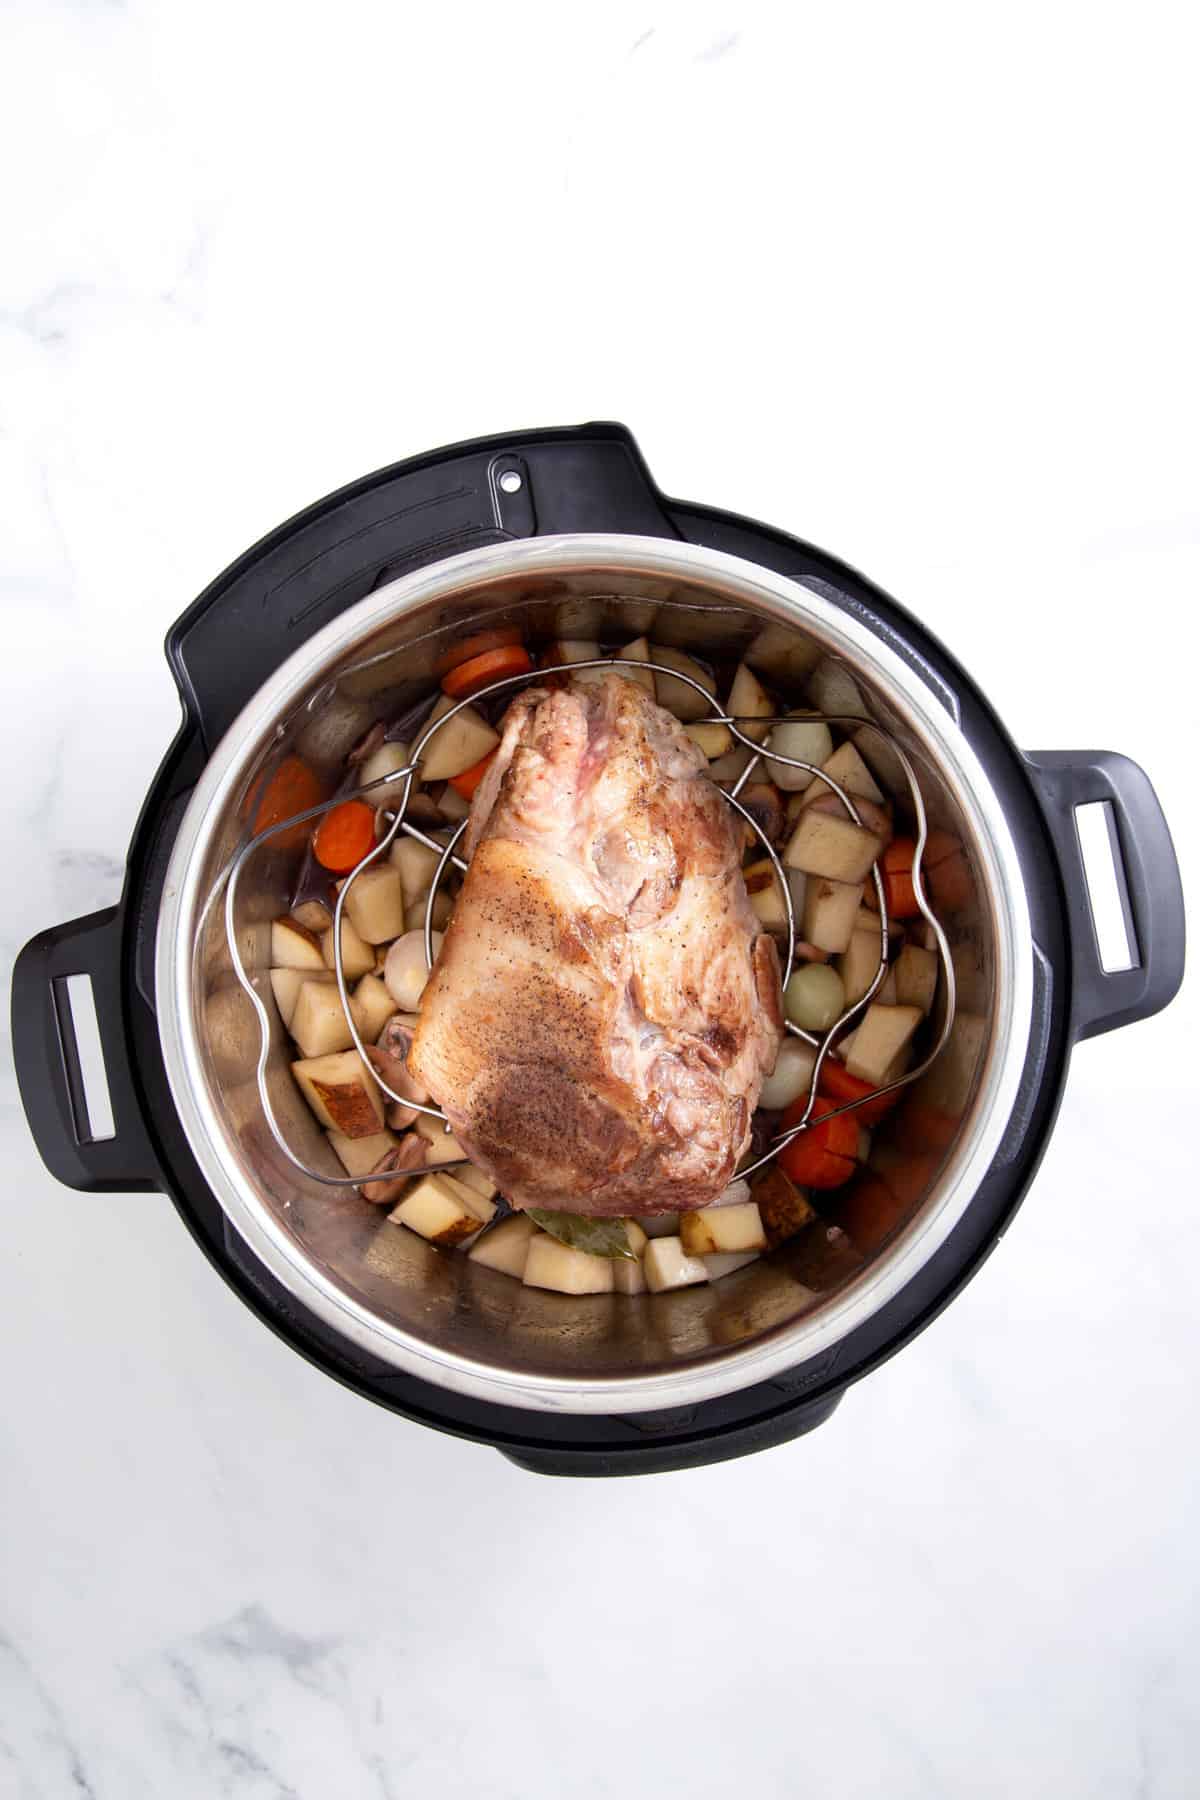 step 3 to make instant pot pork roast, place the pork roast on top of the veggies and pressure cook